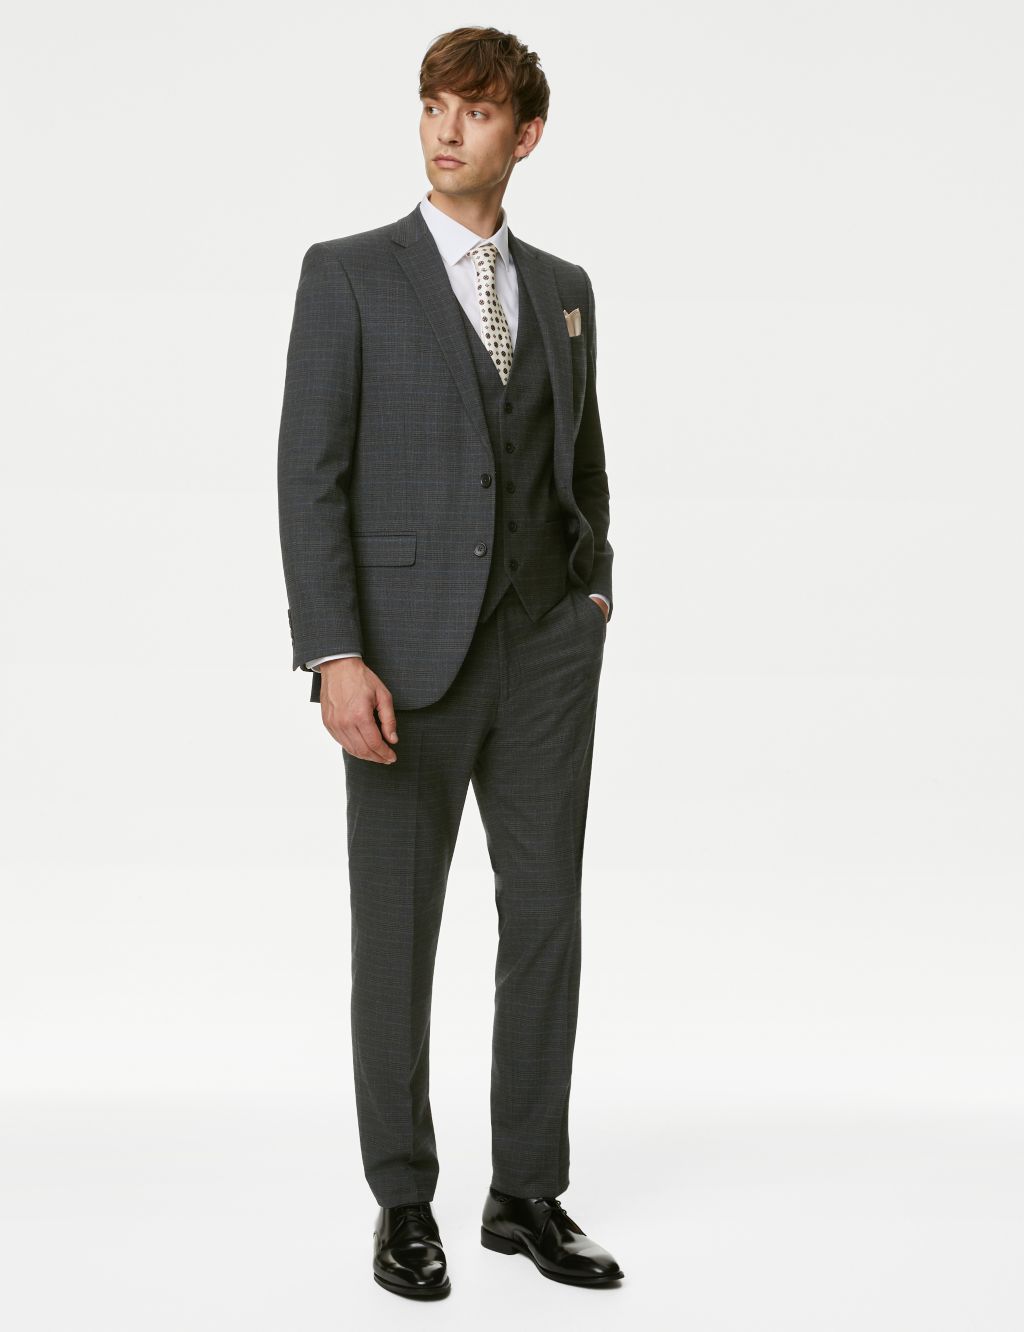 Slim Fit Prince of Wales Check Suit image 1